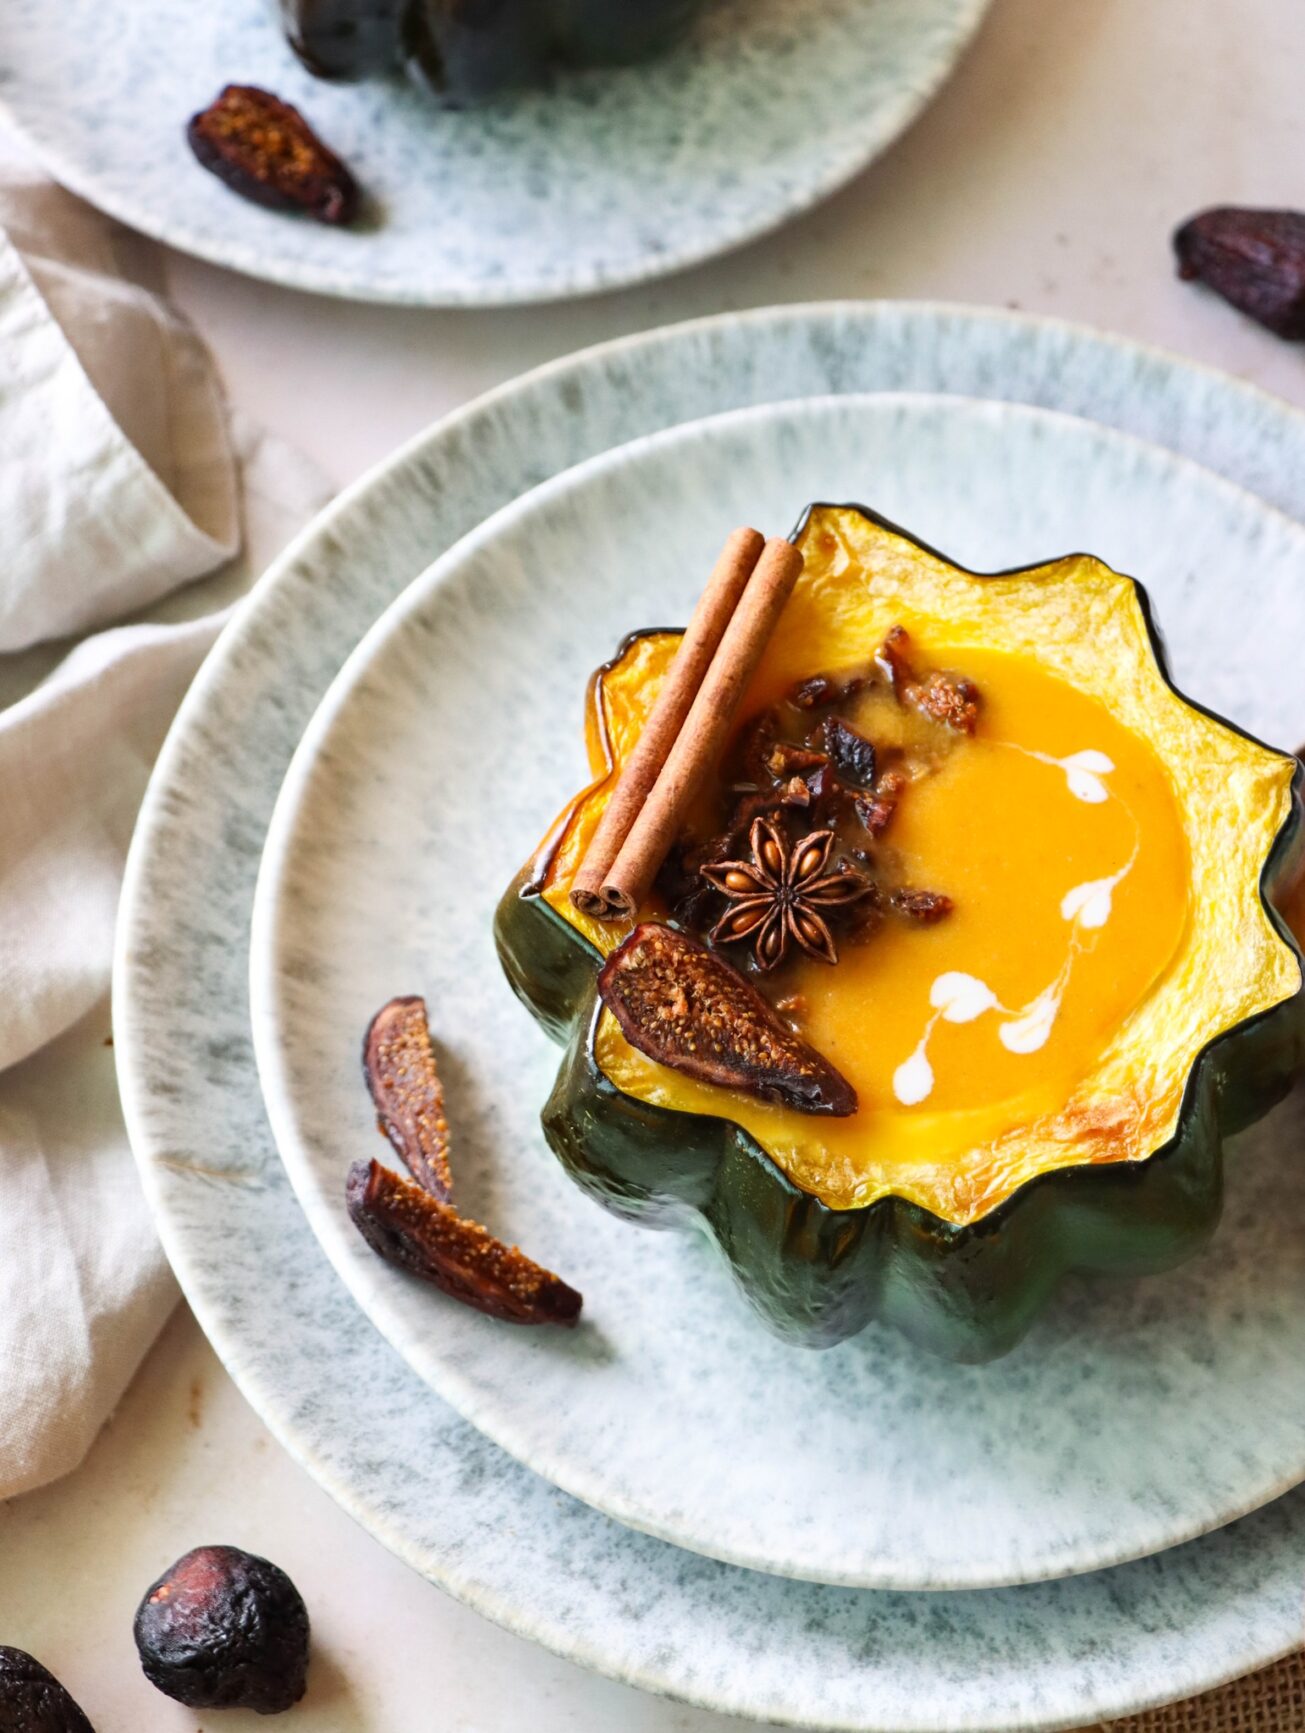 Have you ever tried dried figs for soup? This acorn squash soup recipe taste like autumn. Serve in acorn squash bowls for a festive look.